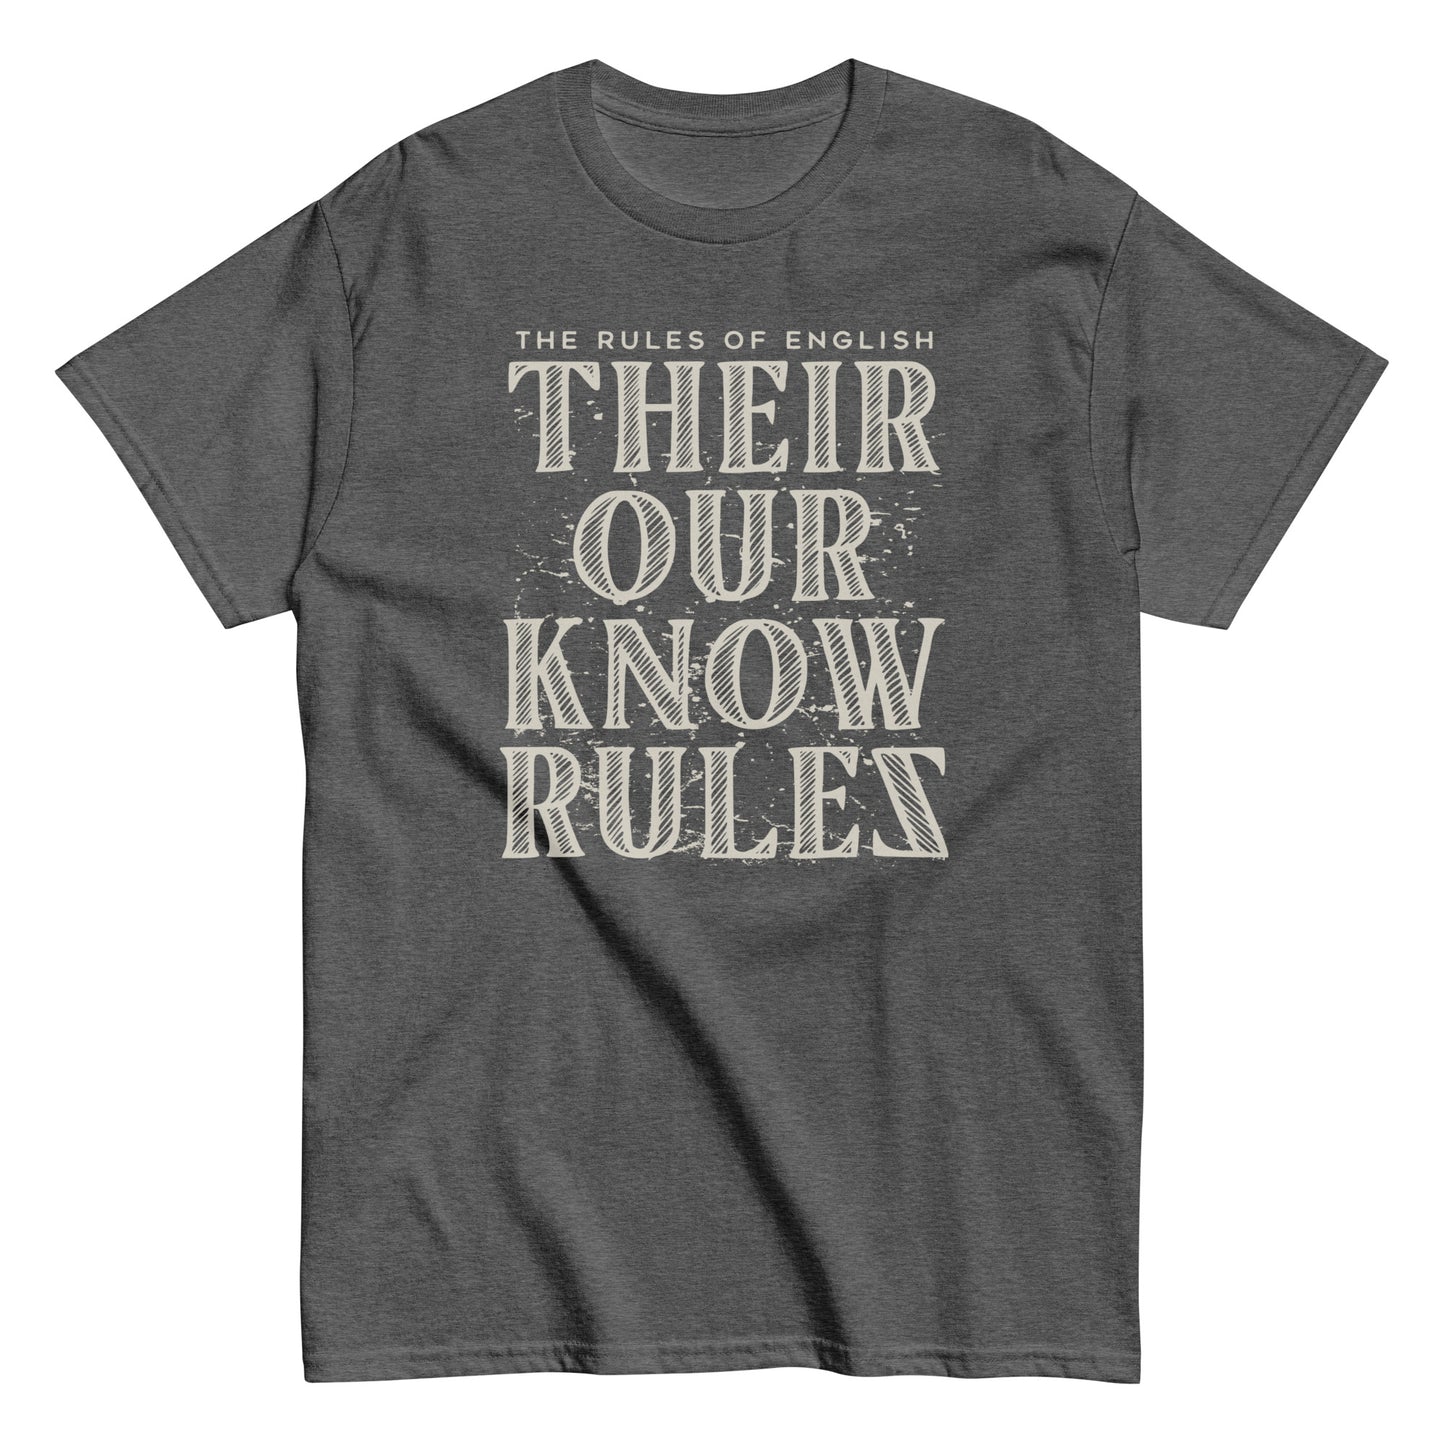 Their Our Know Rules Men's Classic Tee